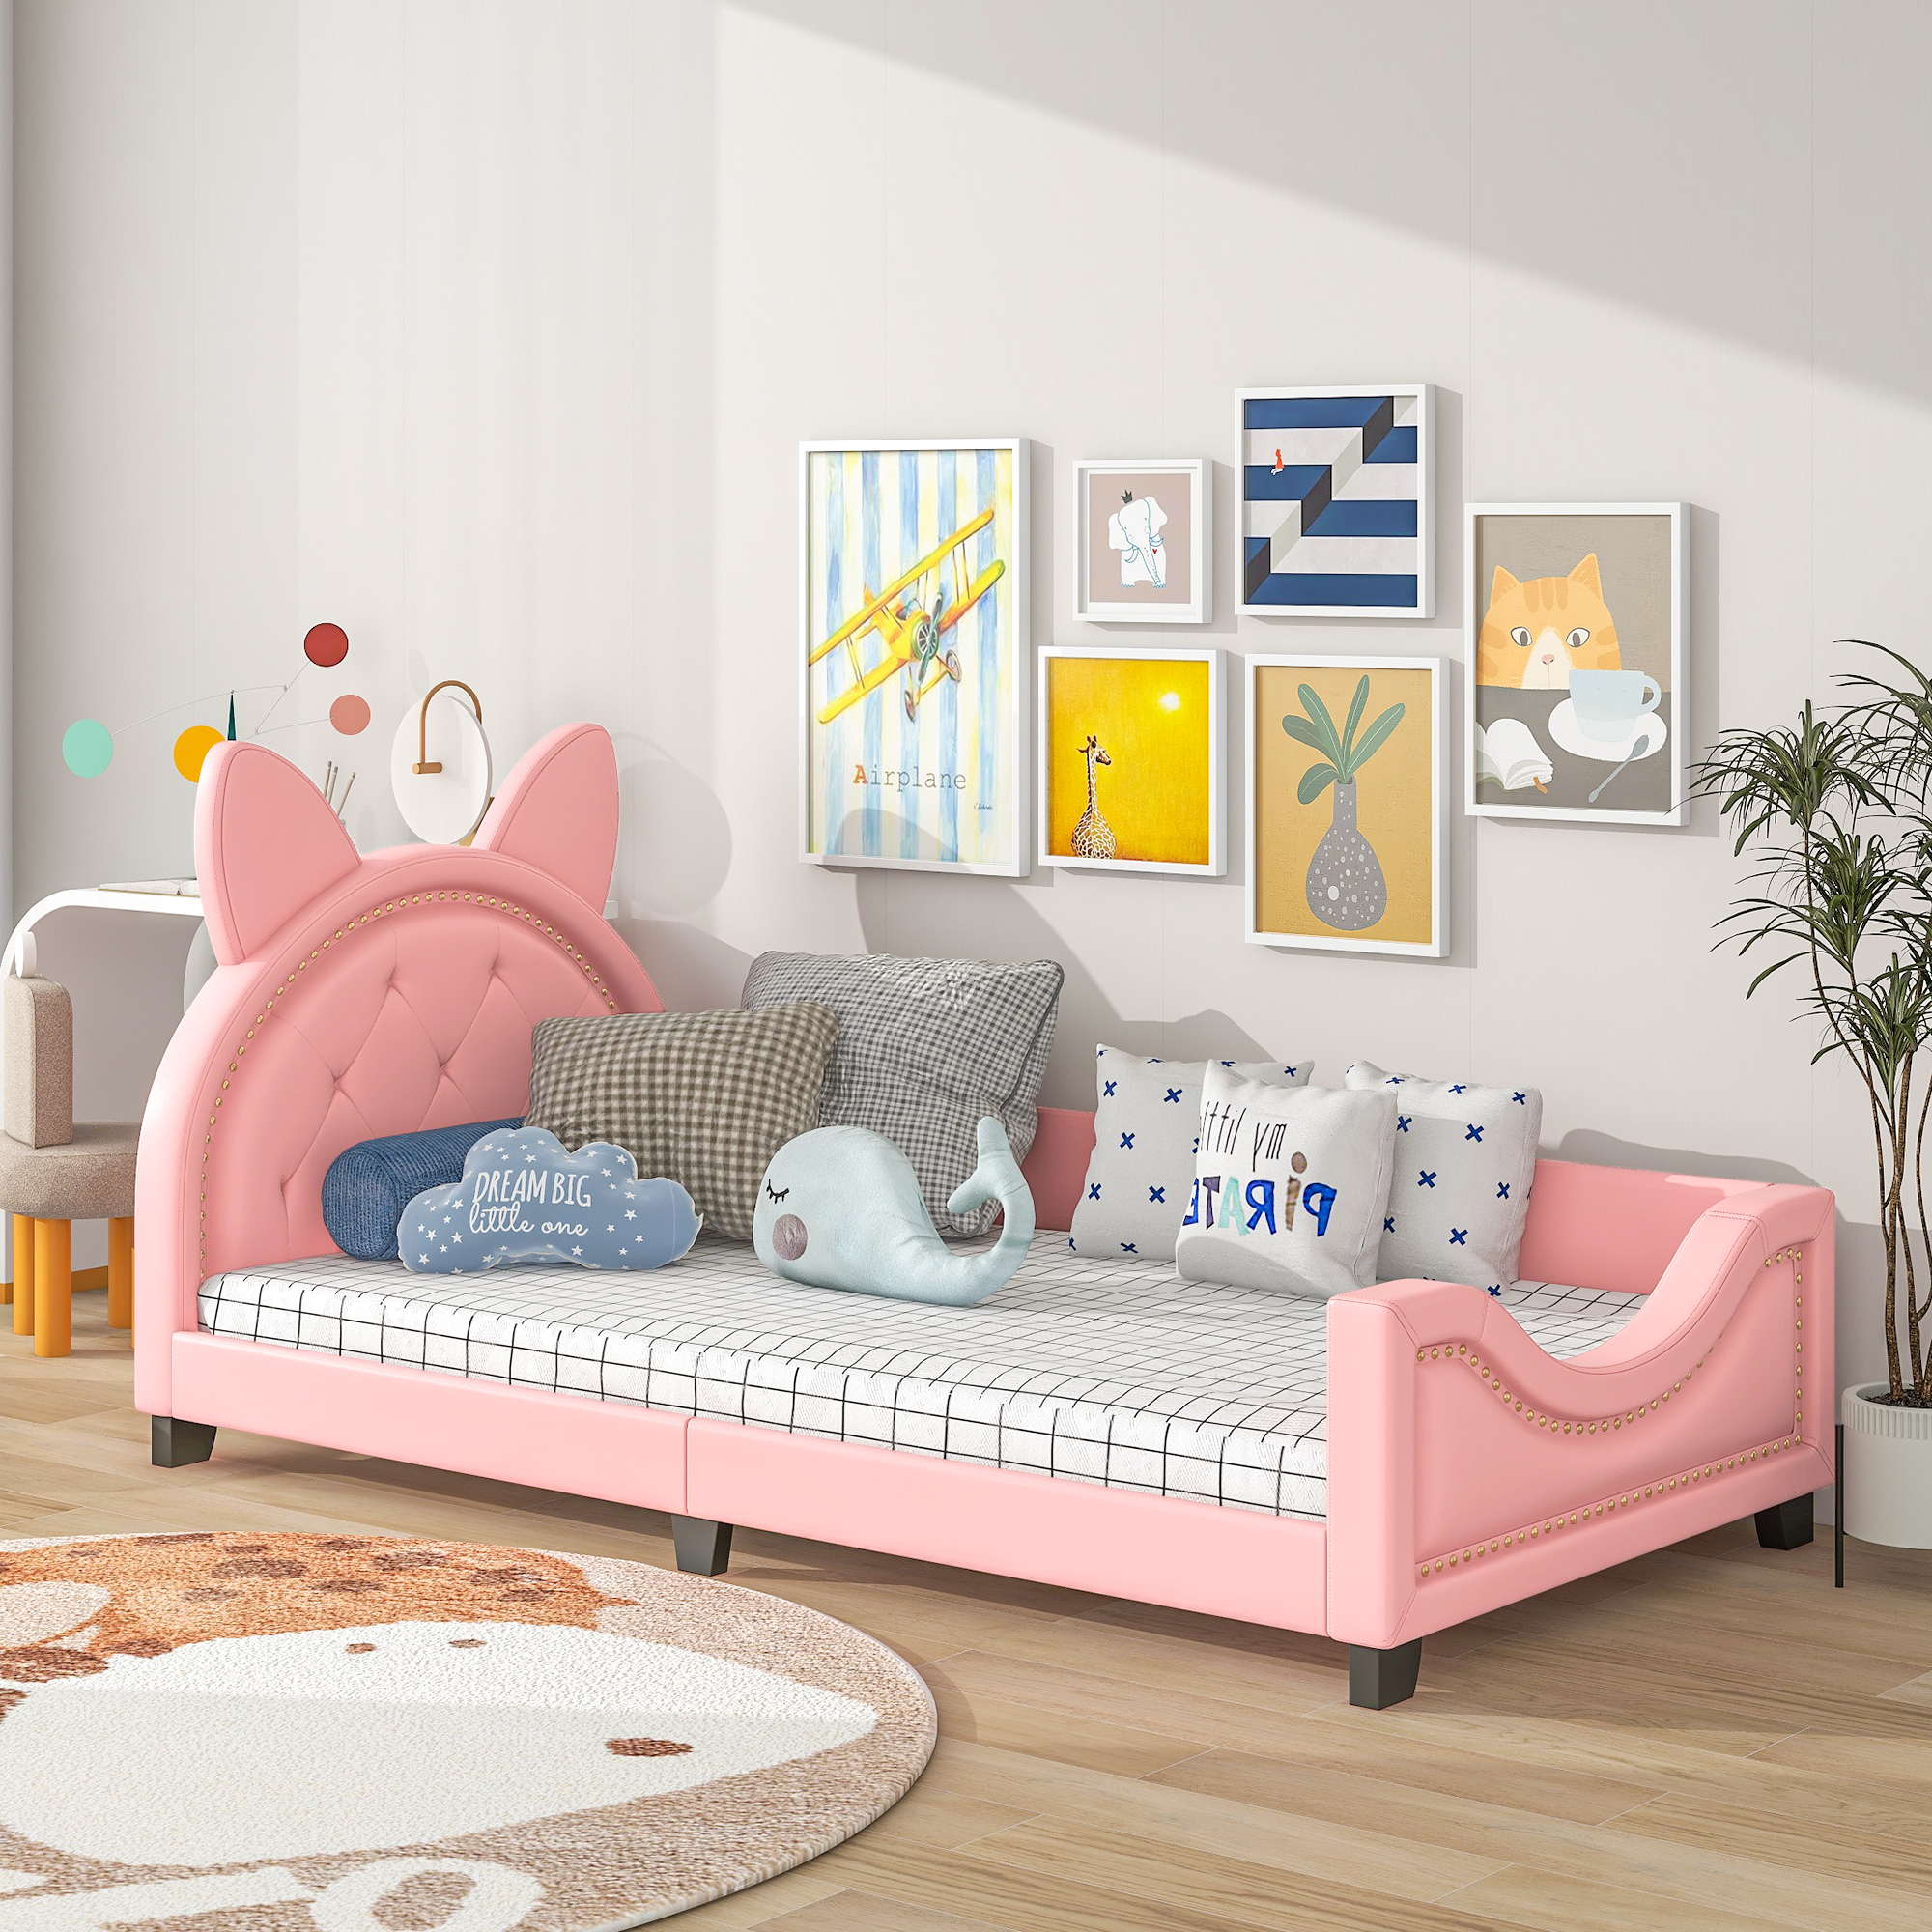 Bunny Shaped Twin Size Upholstery Daybed with Headboard for Kids, Pink - image 1 of 8